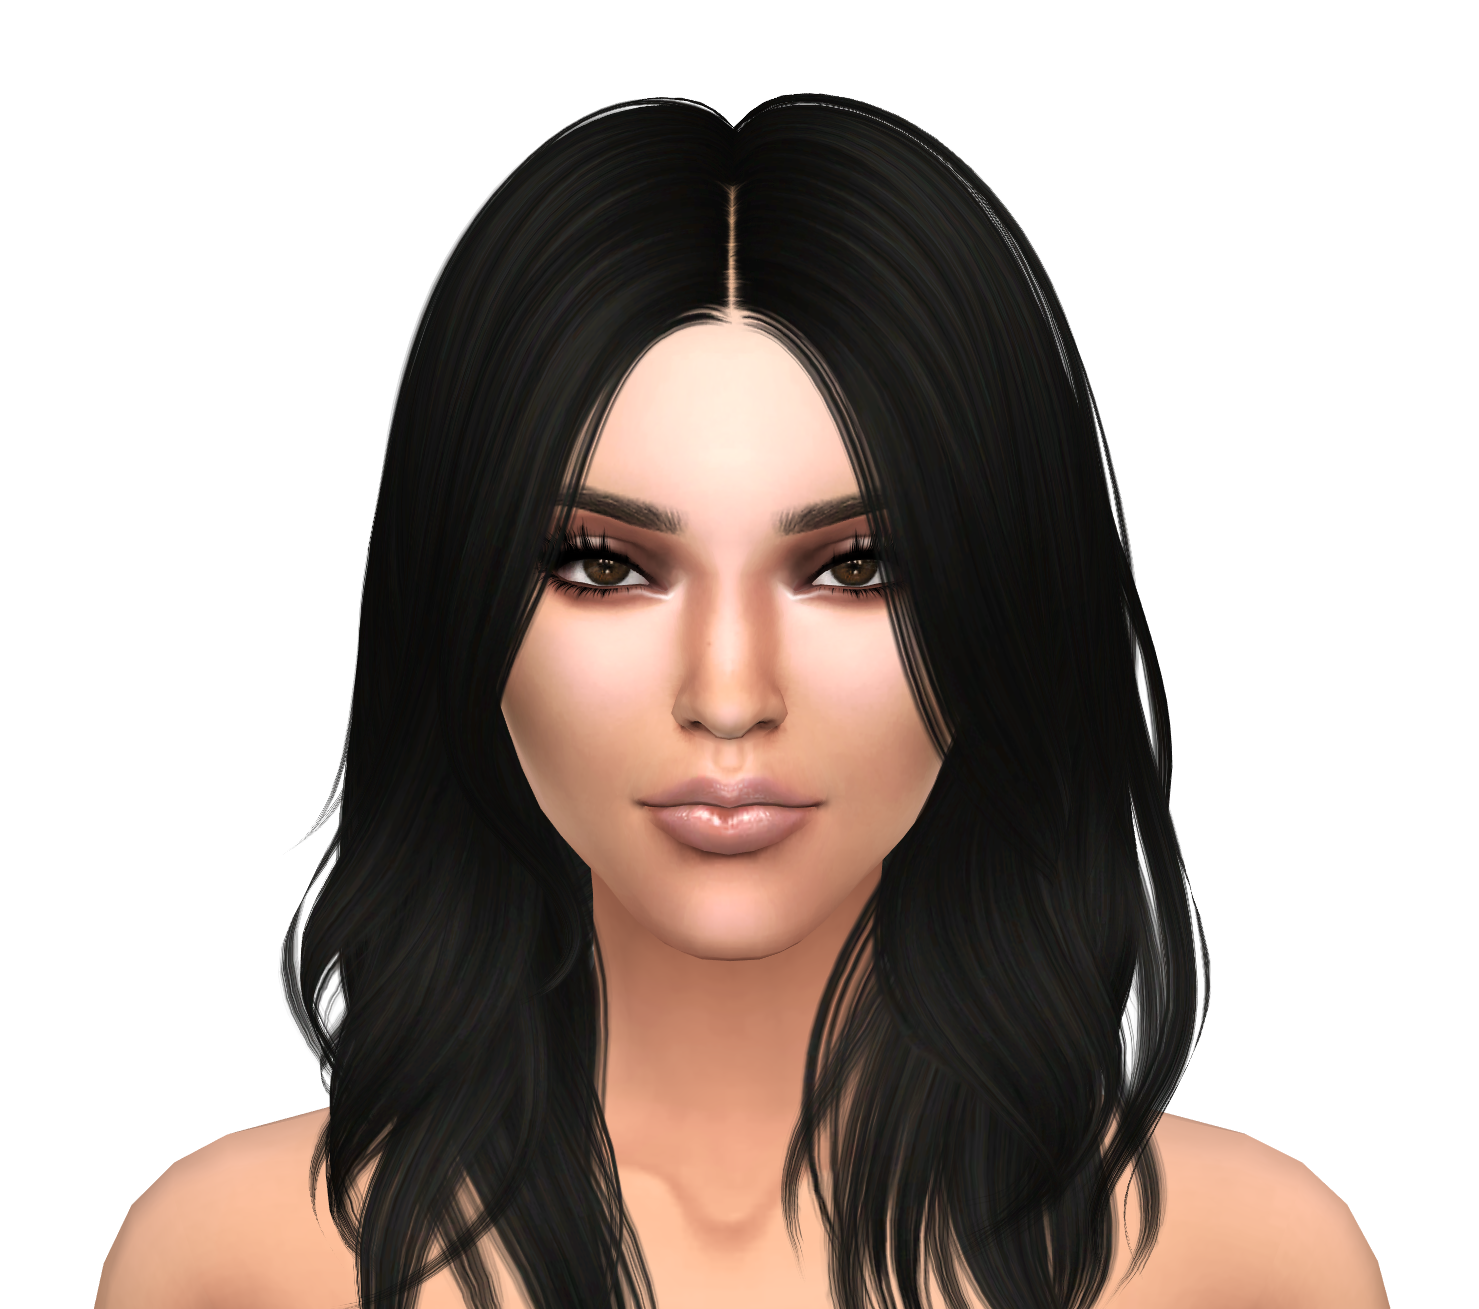 Sims 4 Kendall & Kylie Jenner.